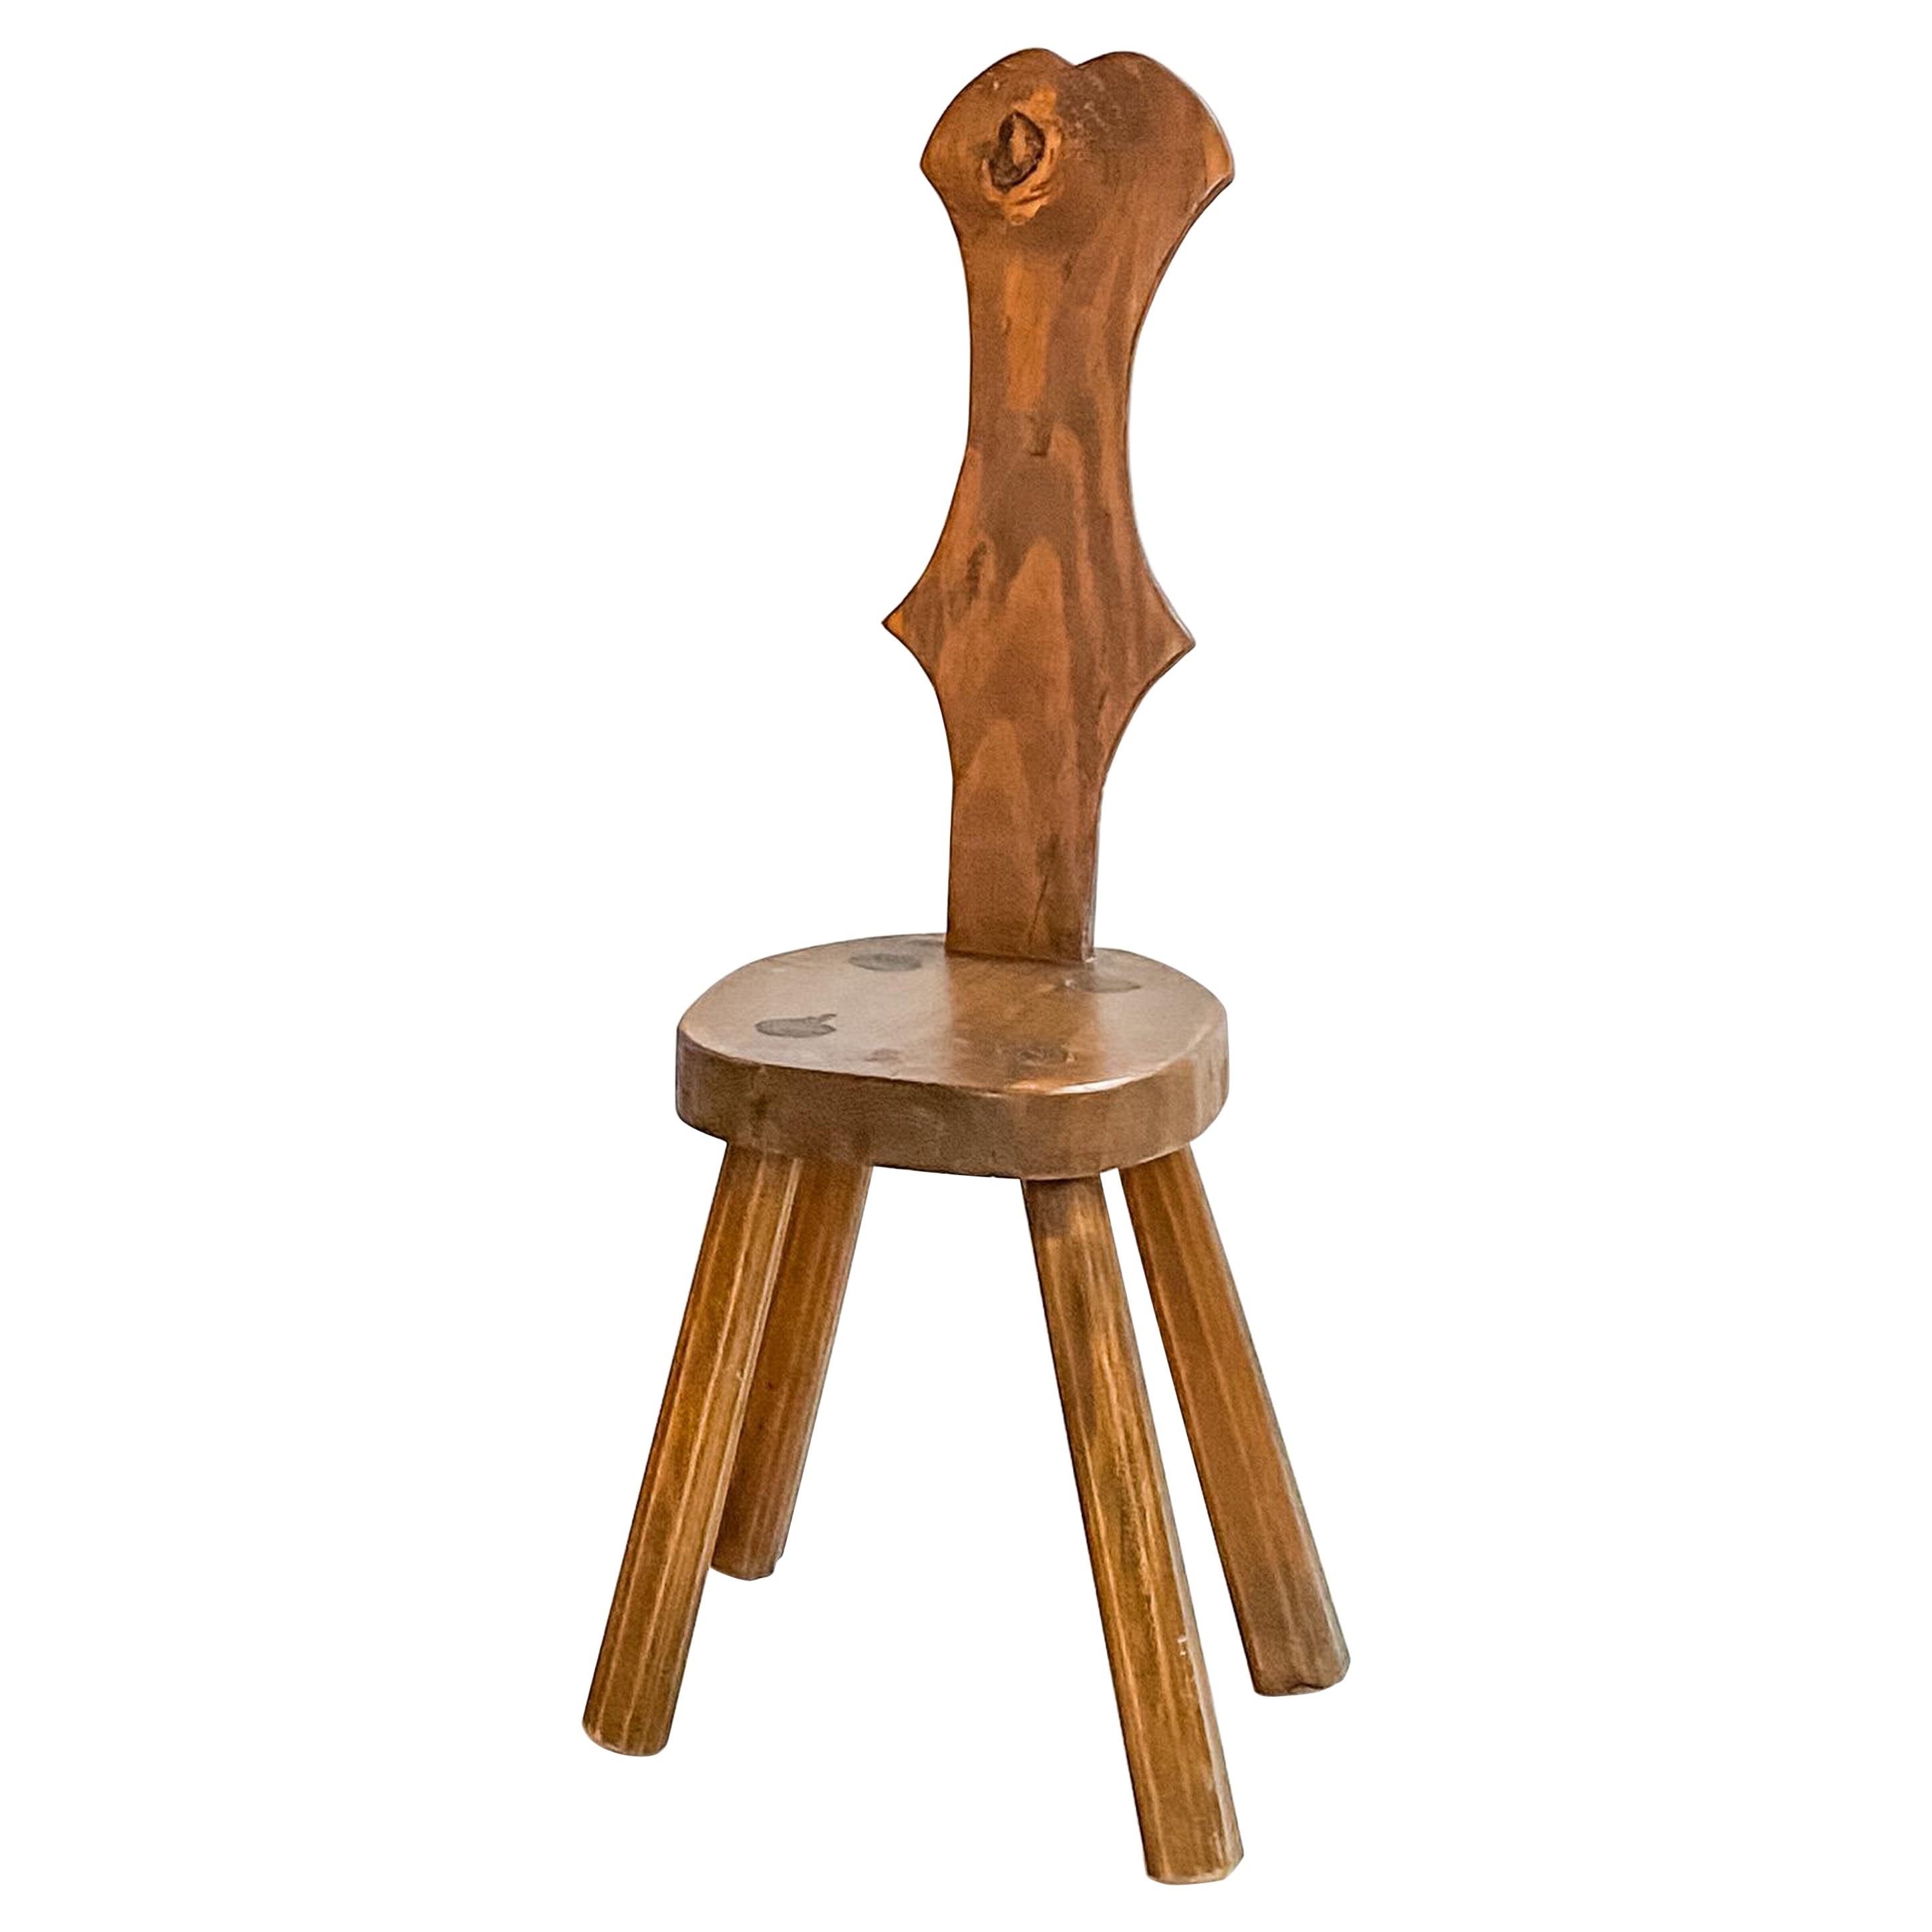 Brutalist Hand Carved Pine Stool/Chair with Violin Back, French, 1950s For Sale